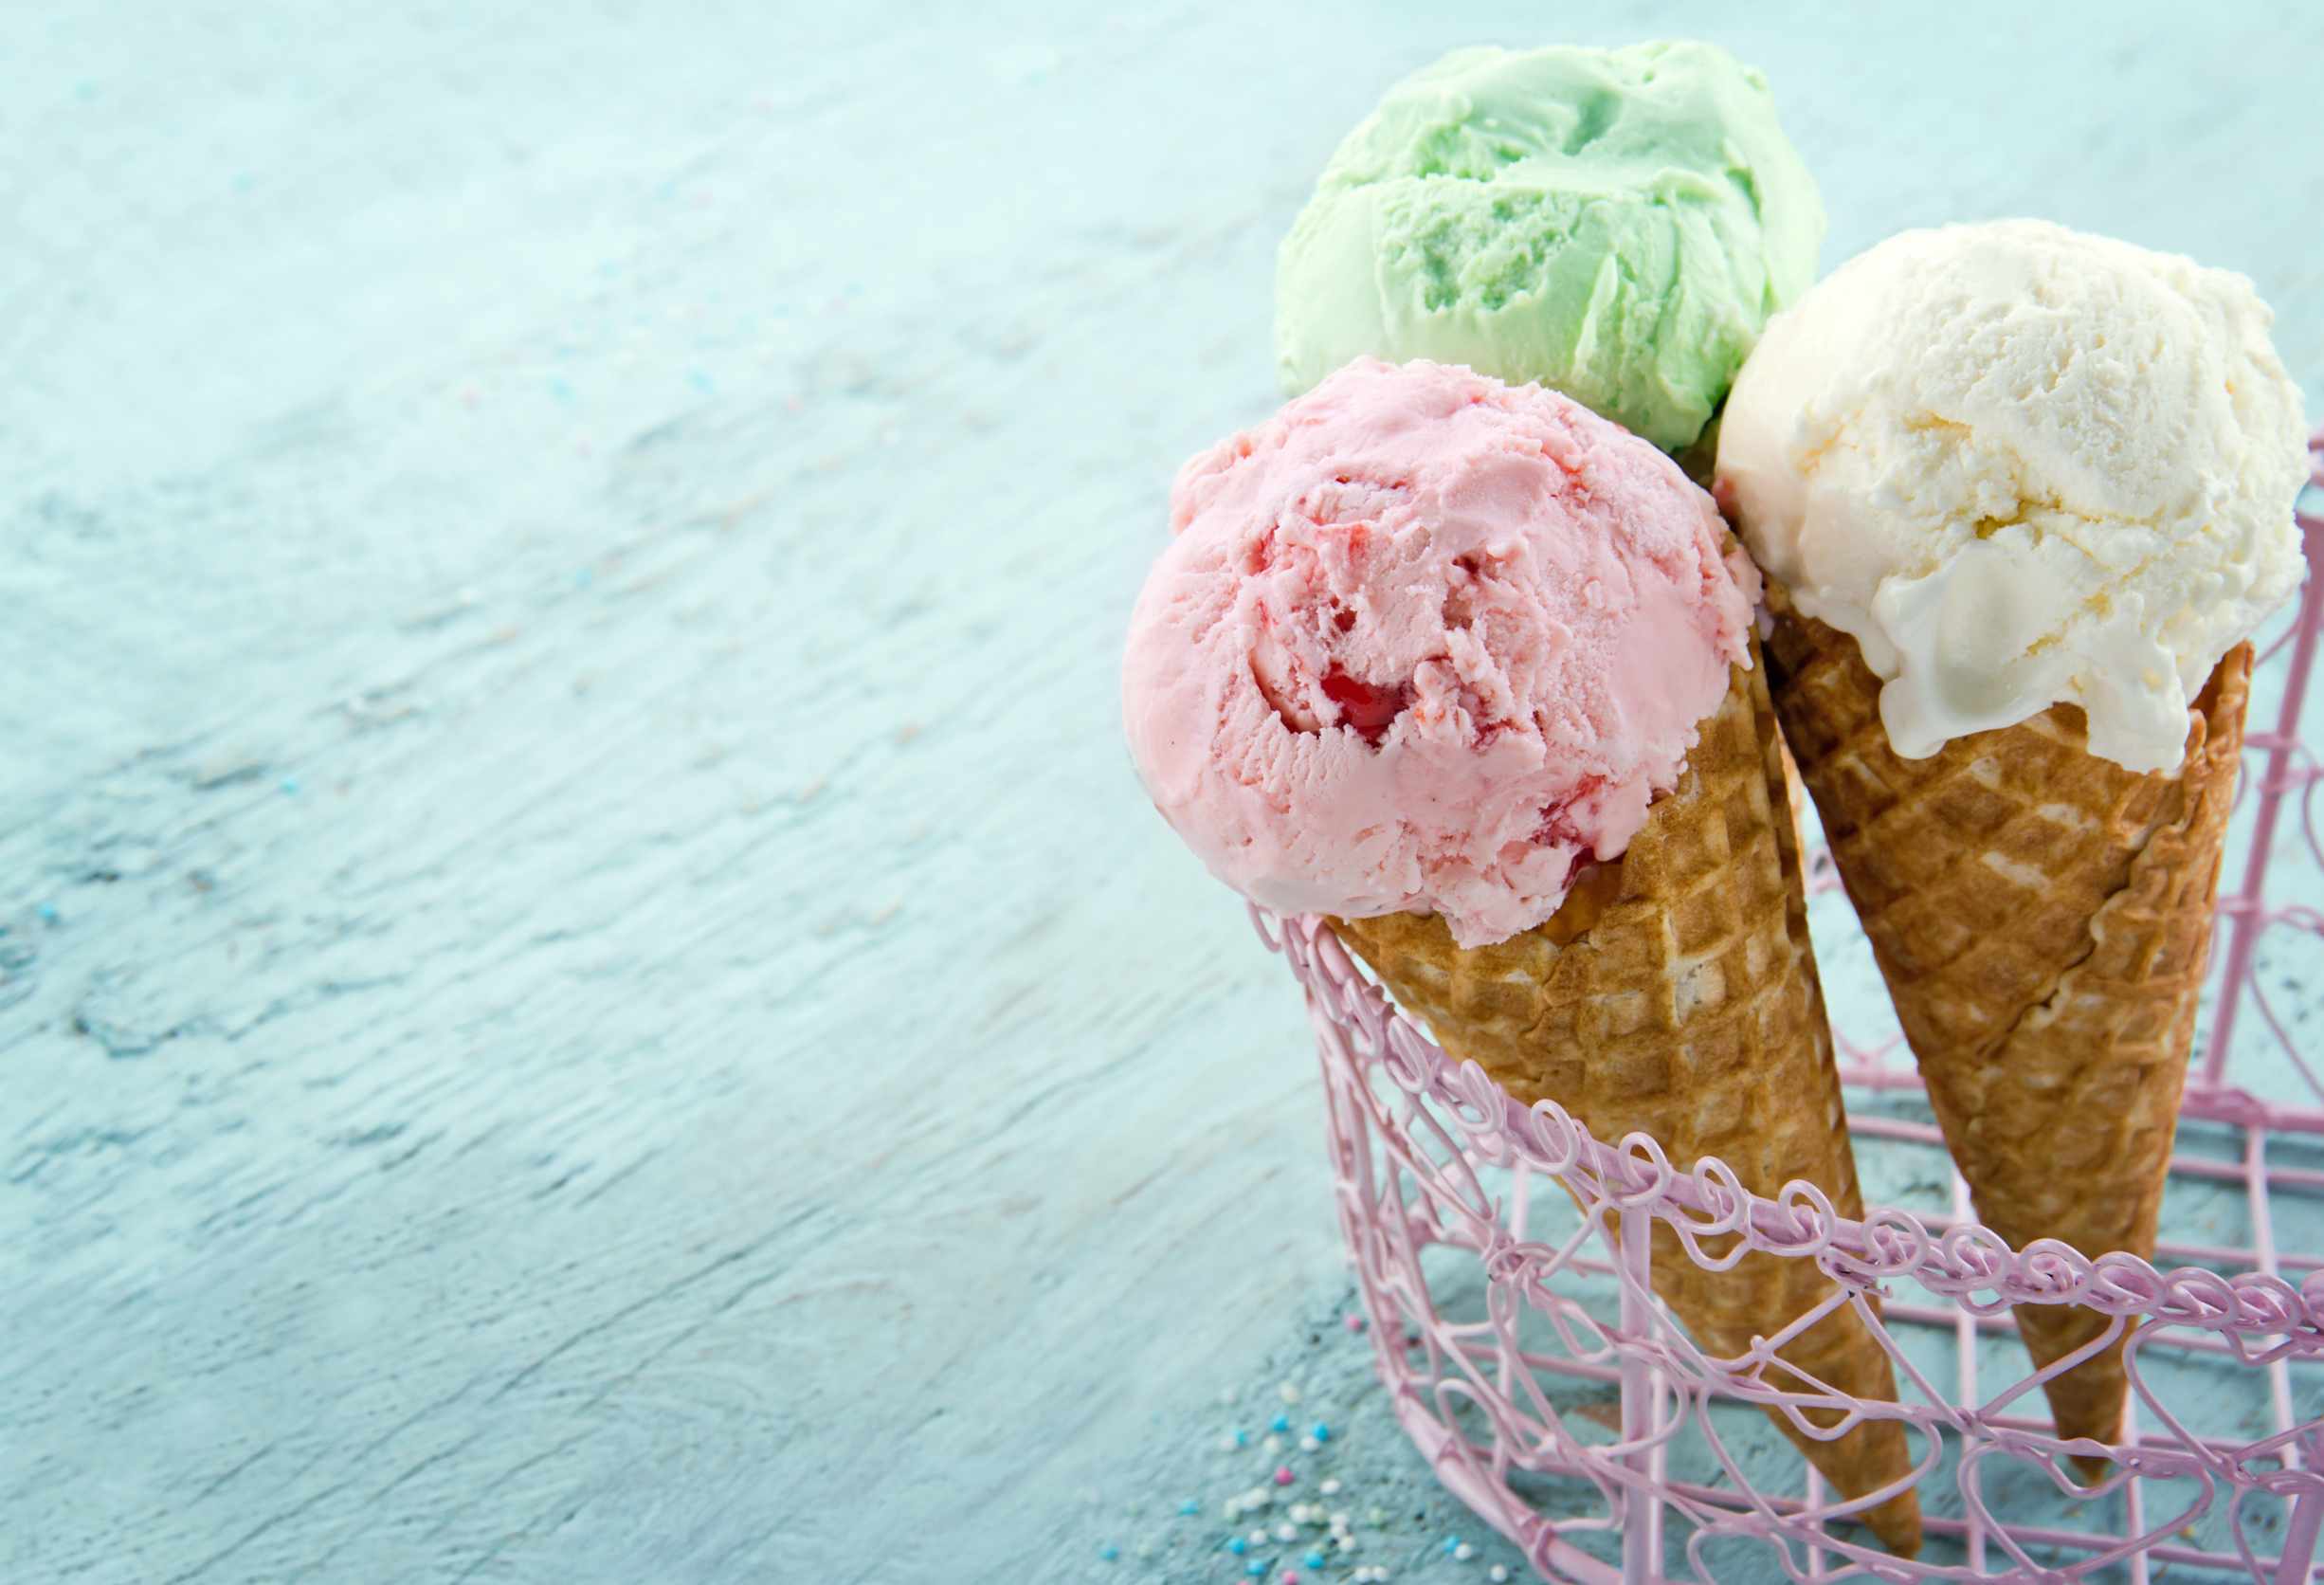 What Causes Brain Freeze and Ice Cream Headaches?